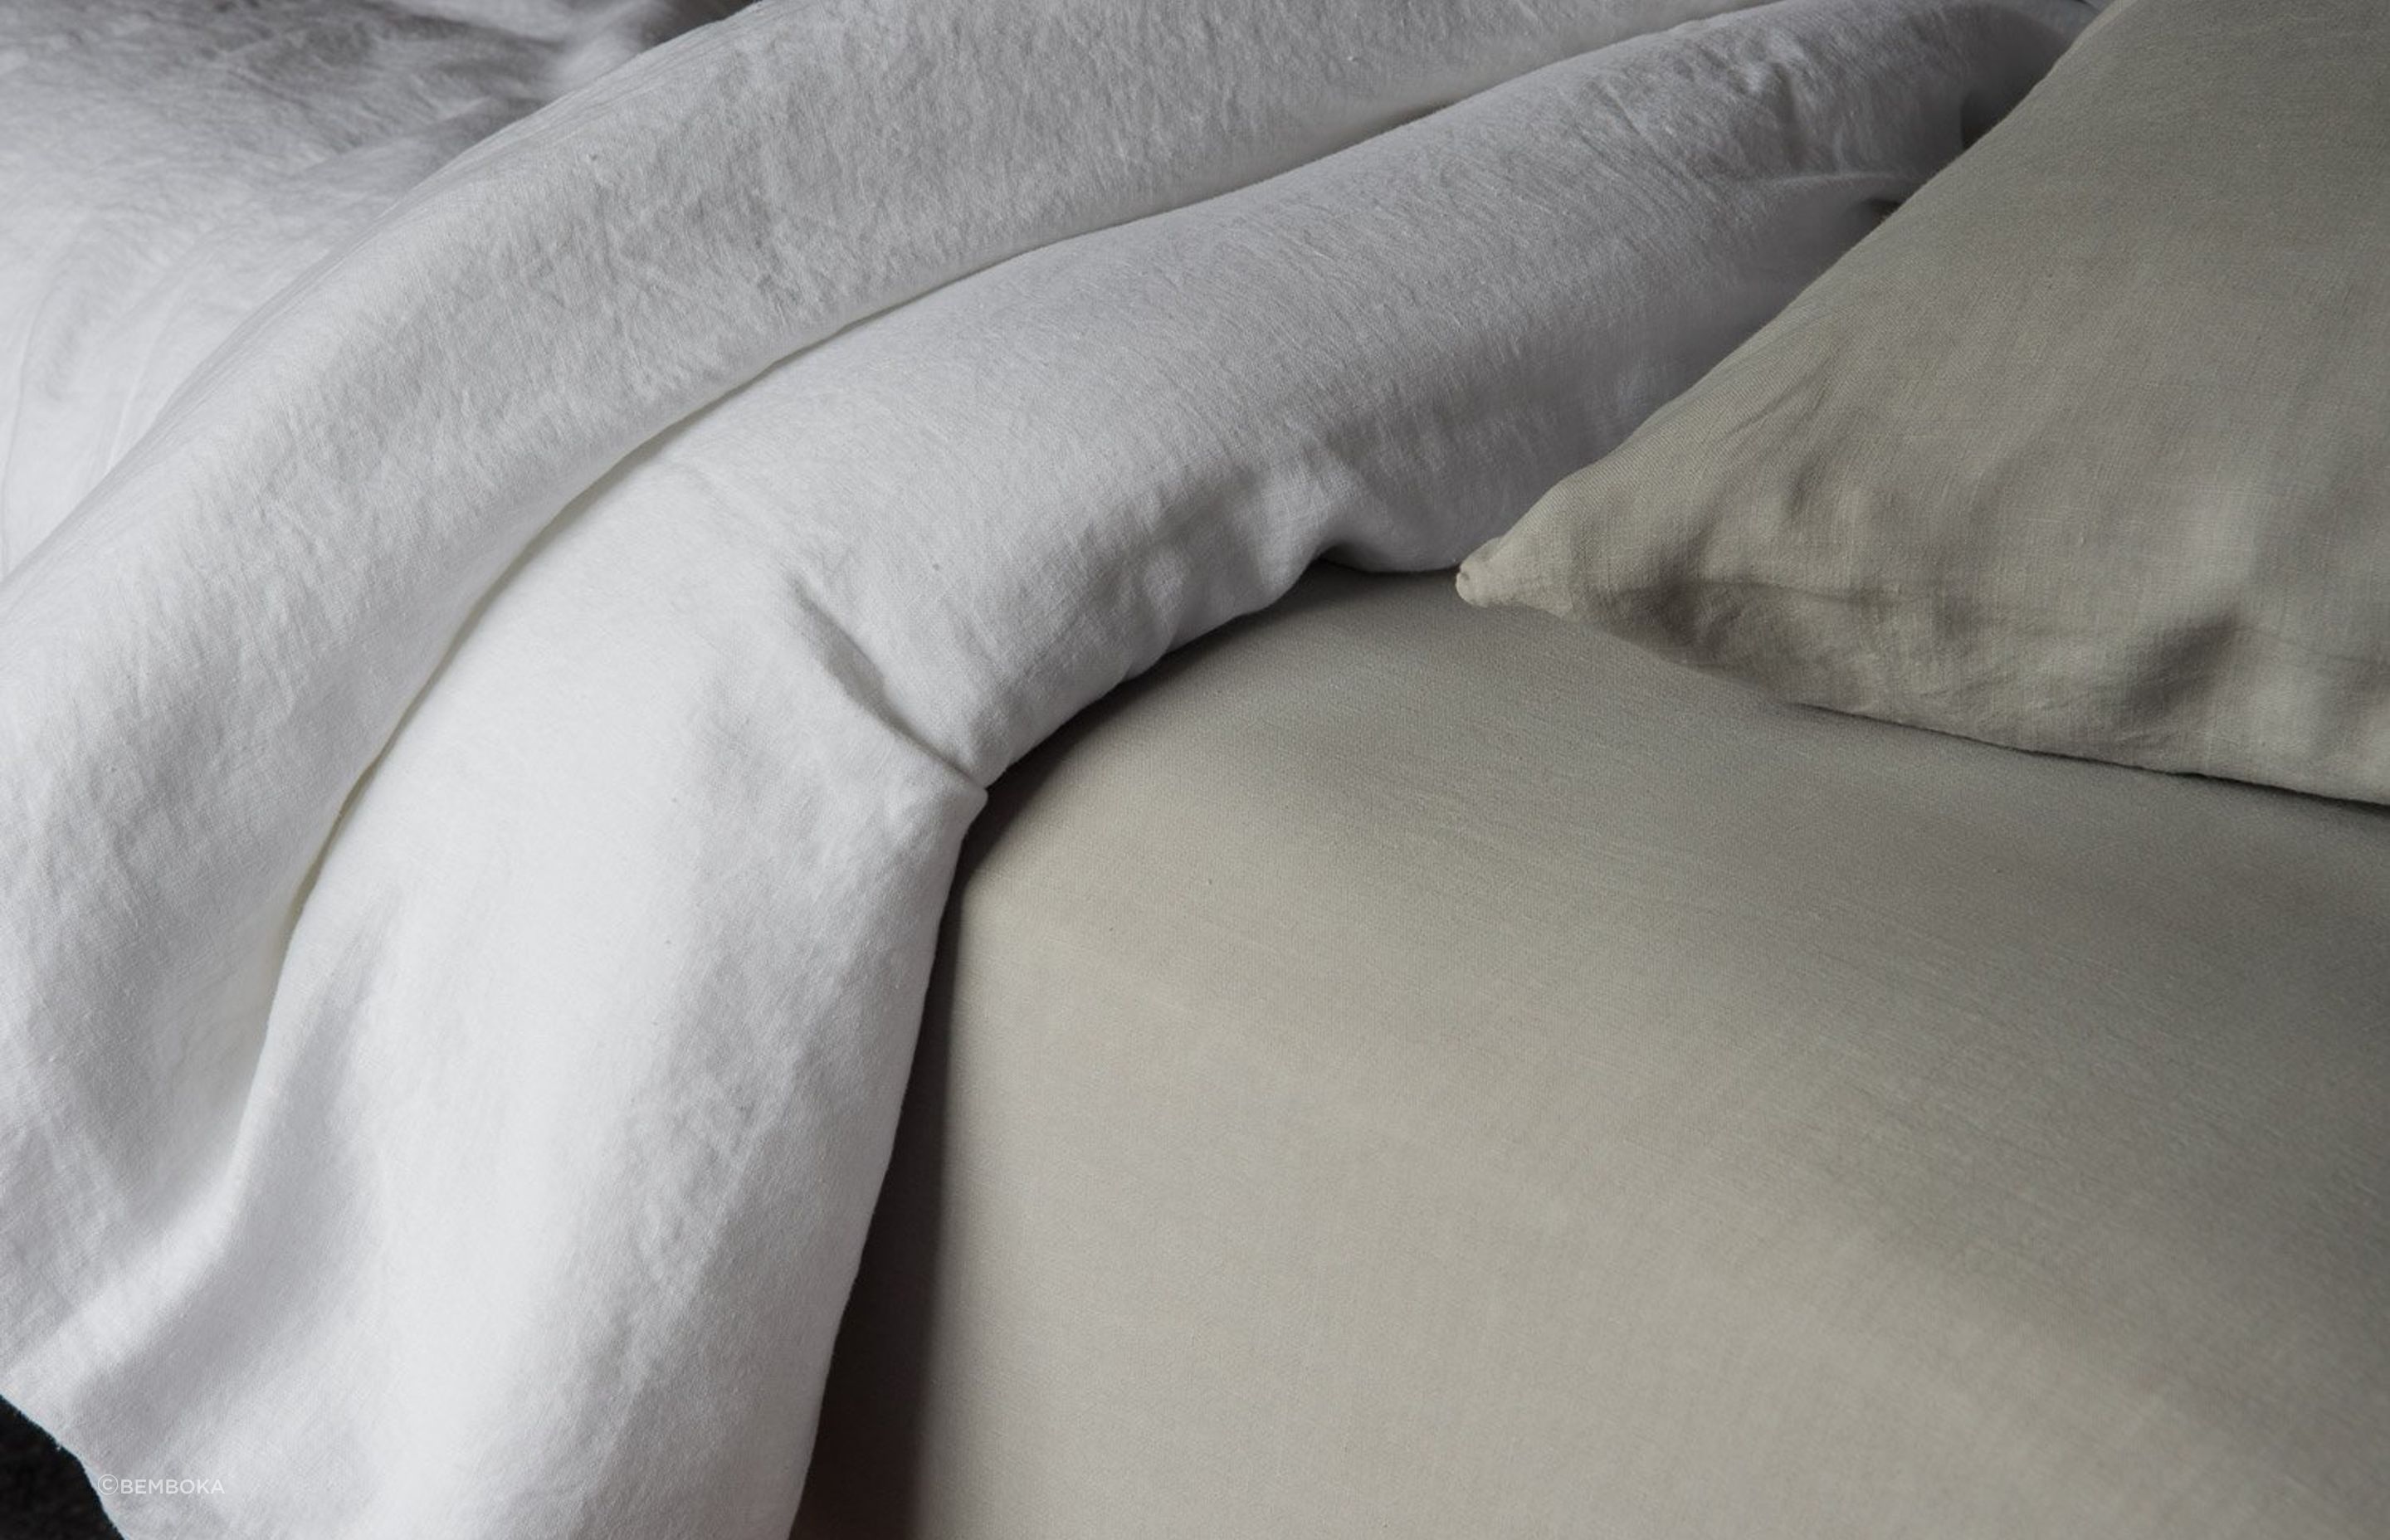 One of the great things about linen sheets, like these Pure Linen Fitted Sheets, is that they get softer over time